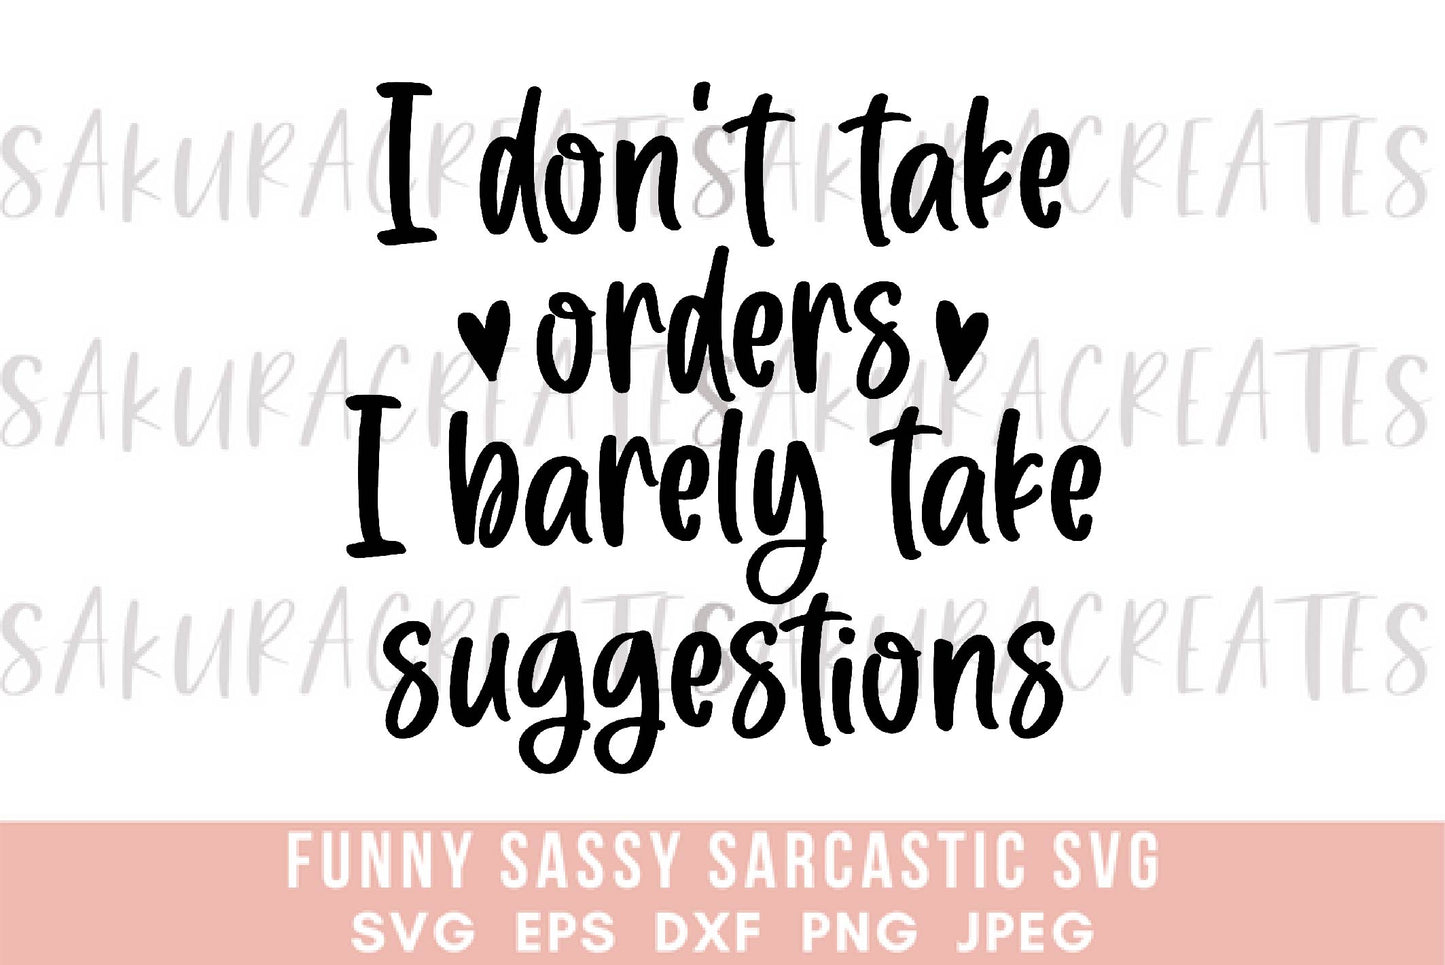 I dont take orders, I barely take suggestions SVG DXF EPS PNG JPEG SVG cut file silhouette cricut funny sarcastic sassy quotes sayings